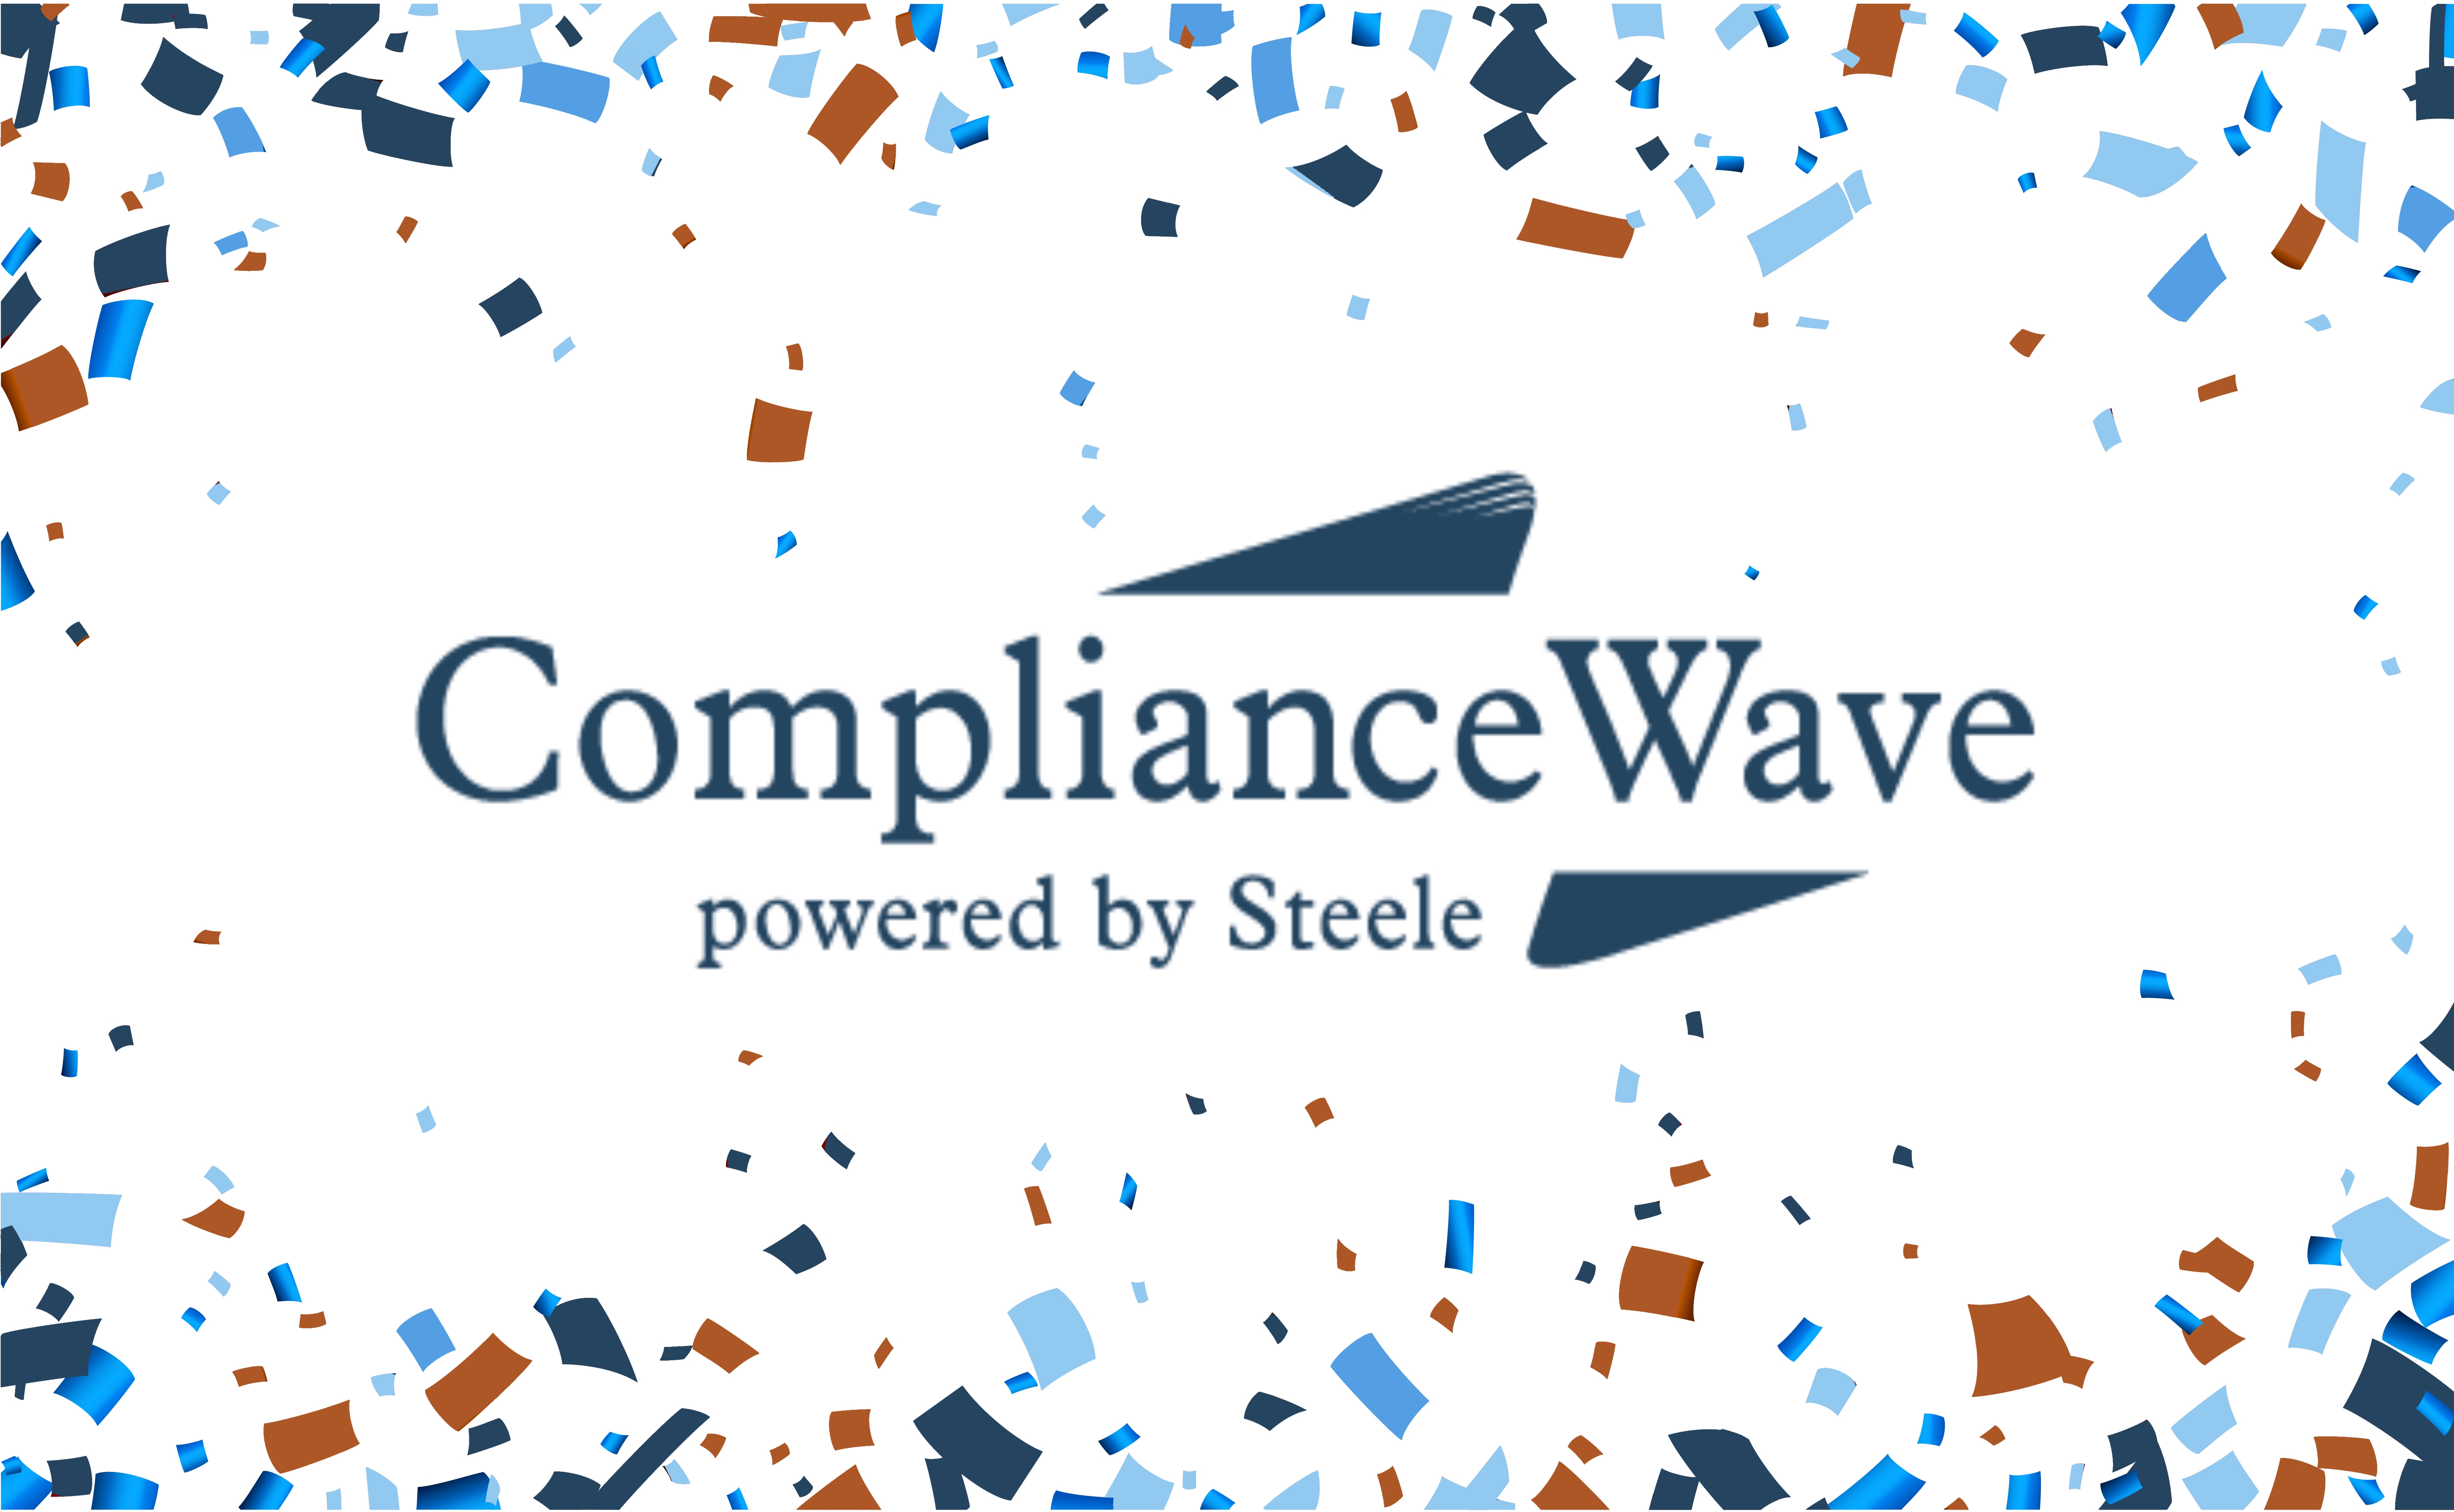 Compliance Wave Expands Their Microleaning Libraries for 2019